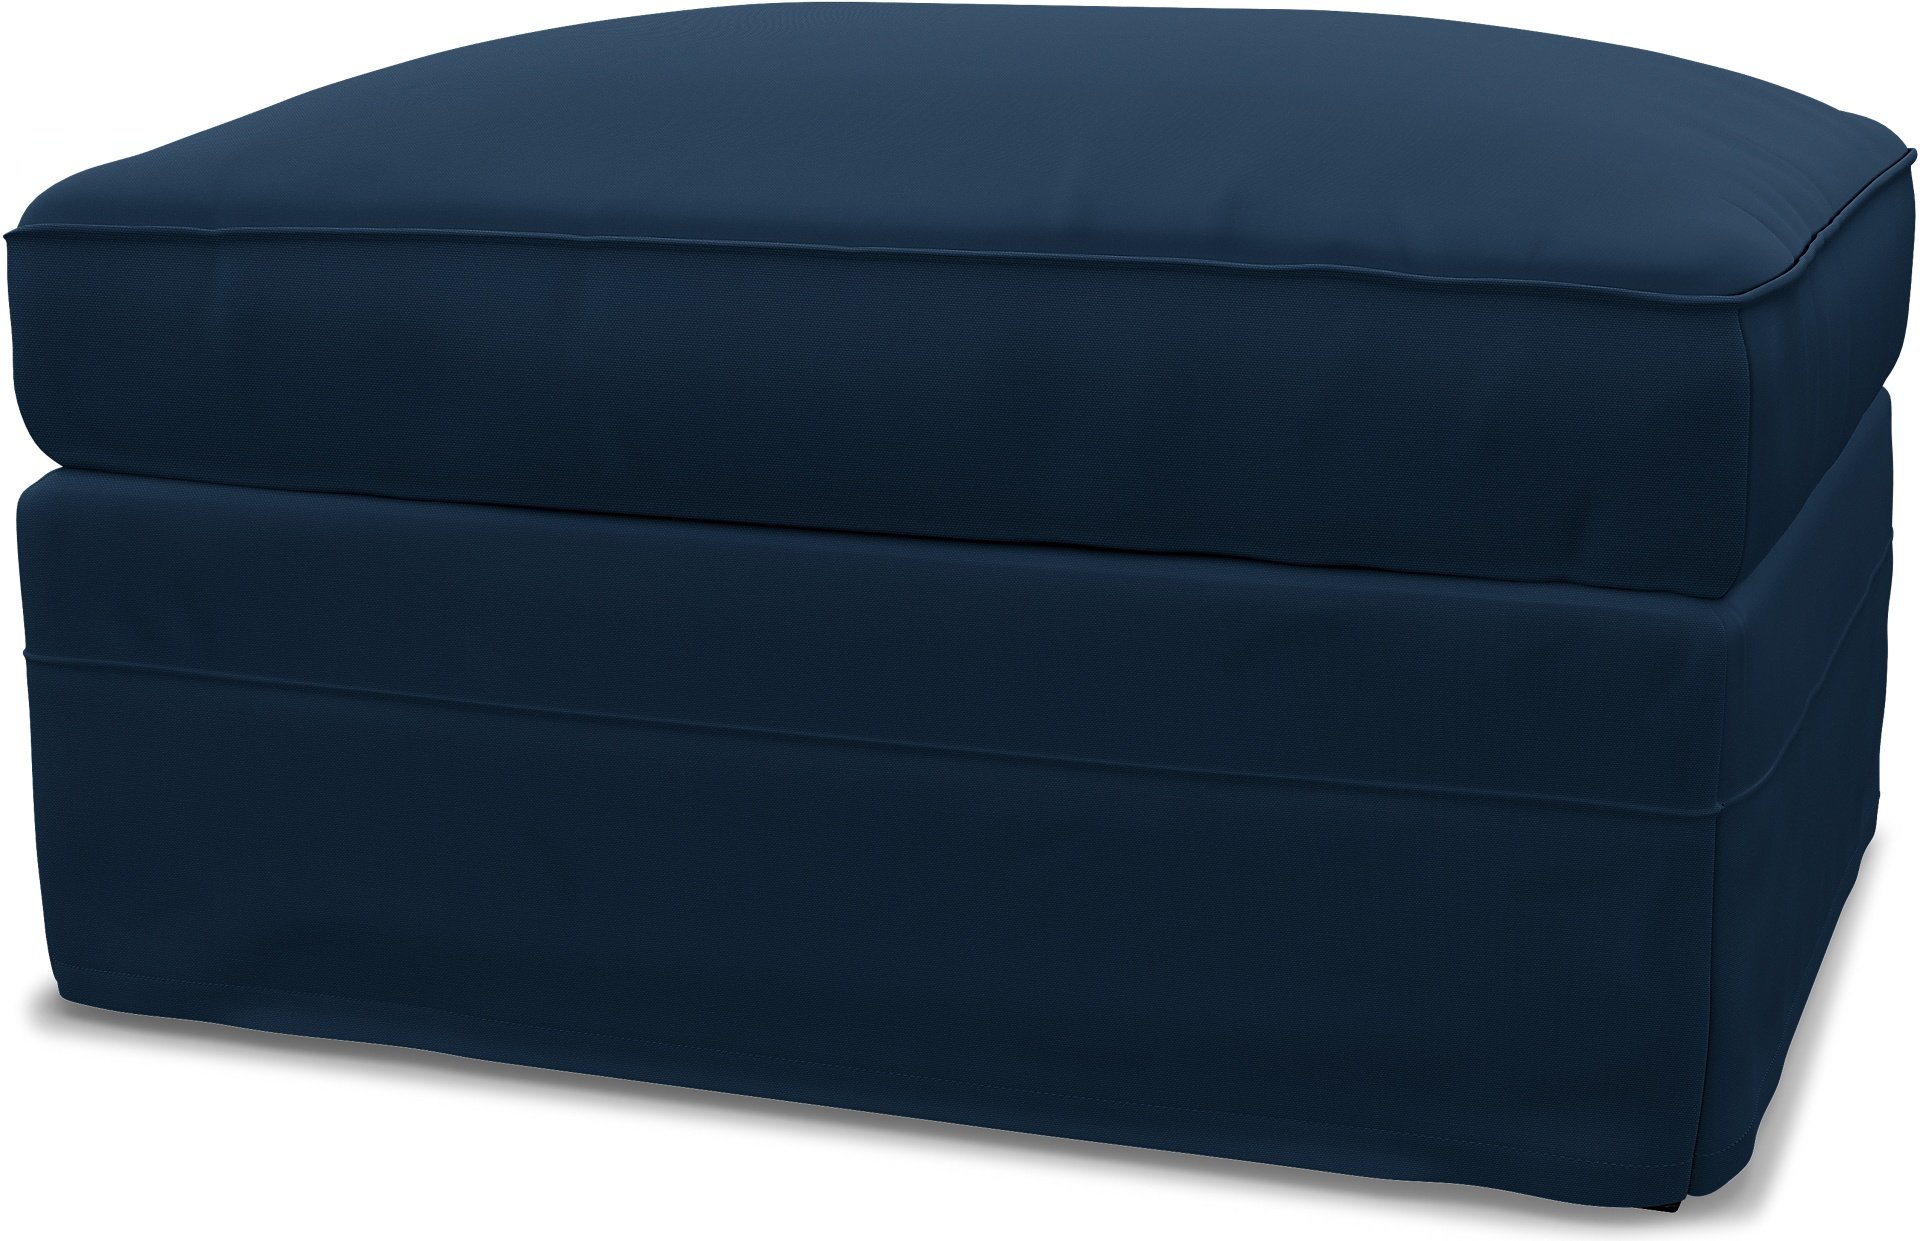 IKEA - Gronlid Footstool with Storage Cover, Deep Navy Blue, Cotton - Bemz